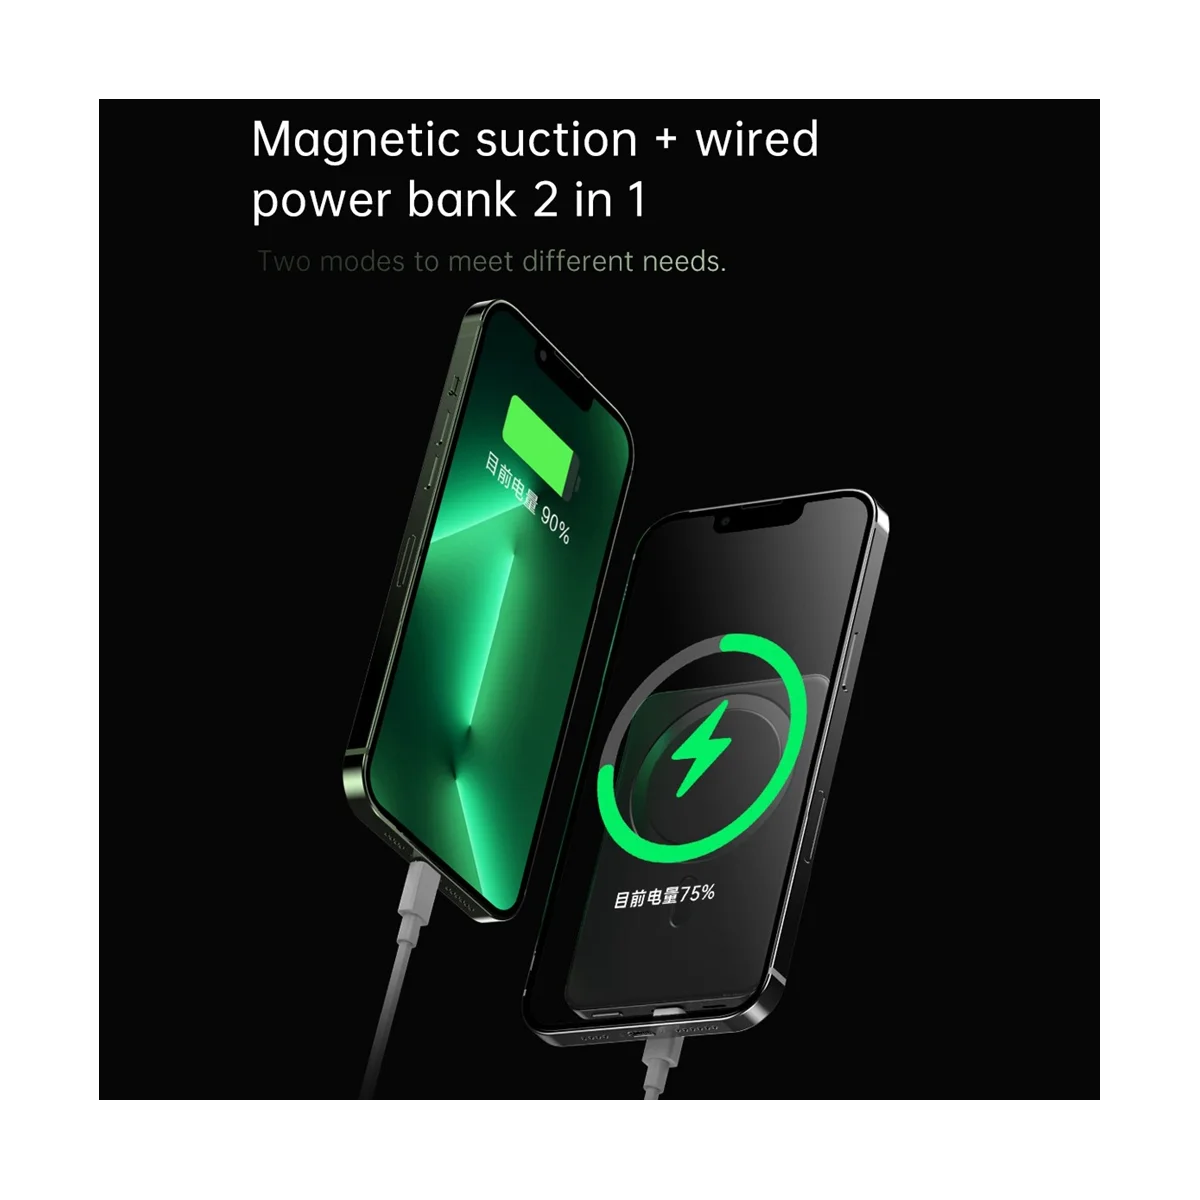 

20W 10000MAh Macsafe Powerbank Magnetic Power Bank Wireless Charger Portable Charger 20W Power Bank Fast Charging,Purple